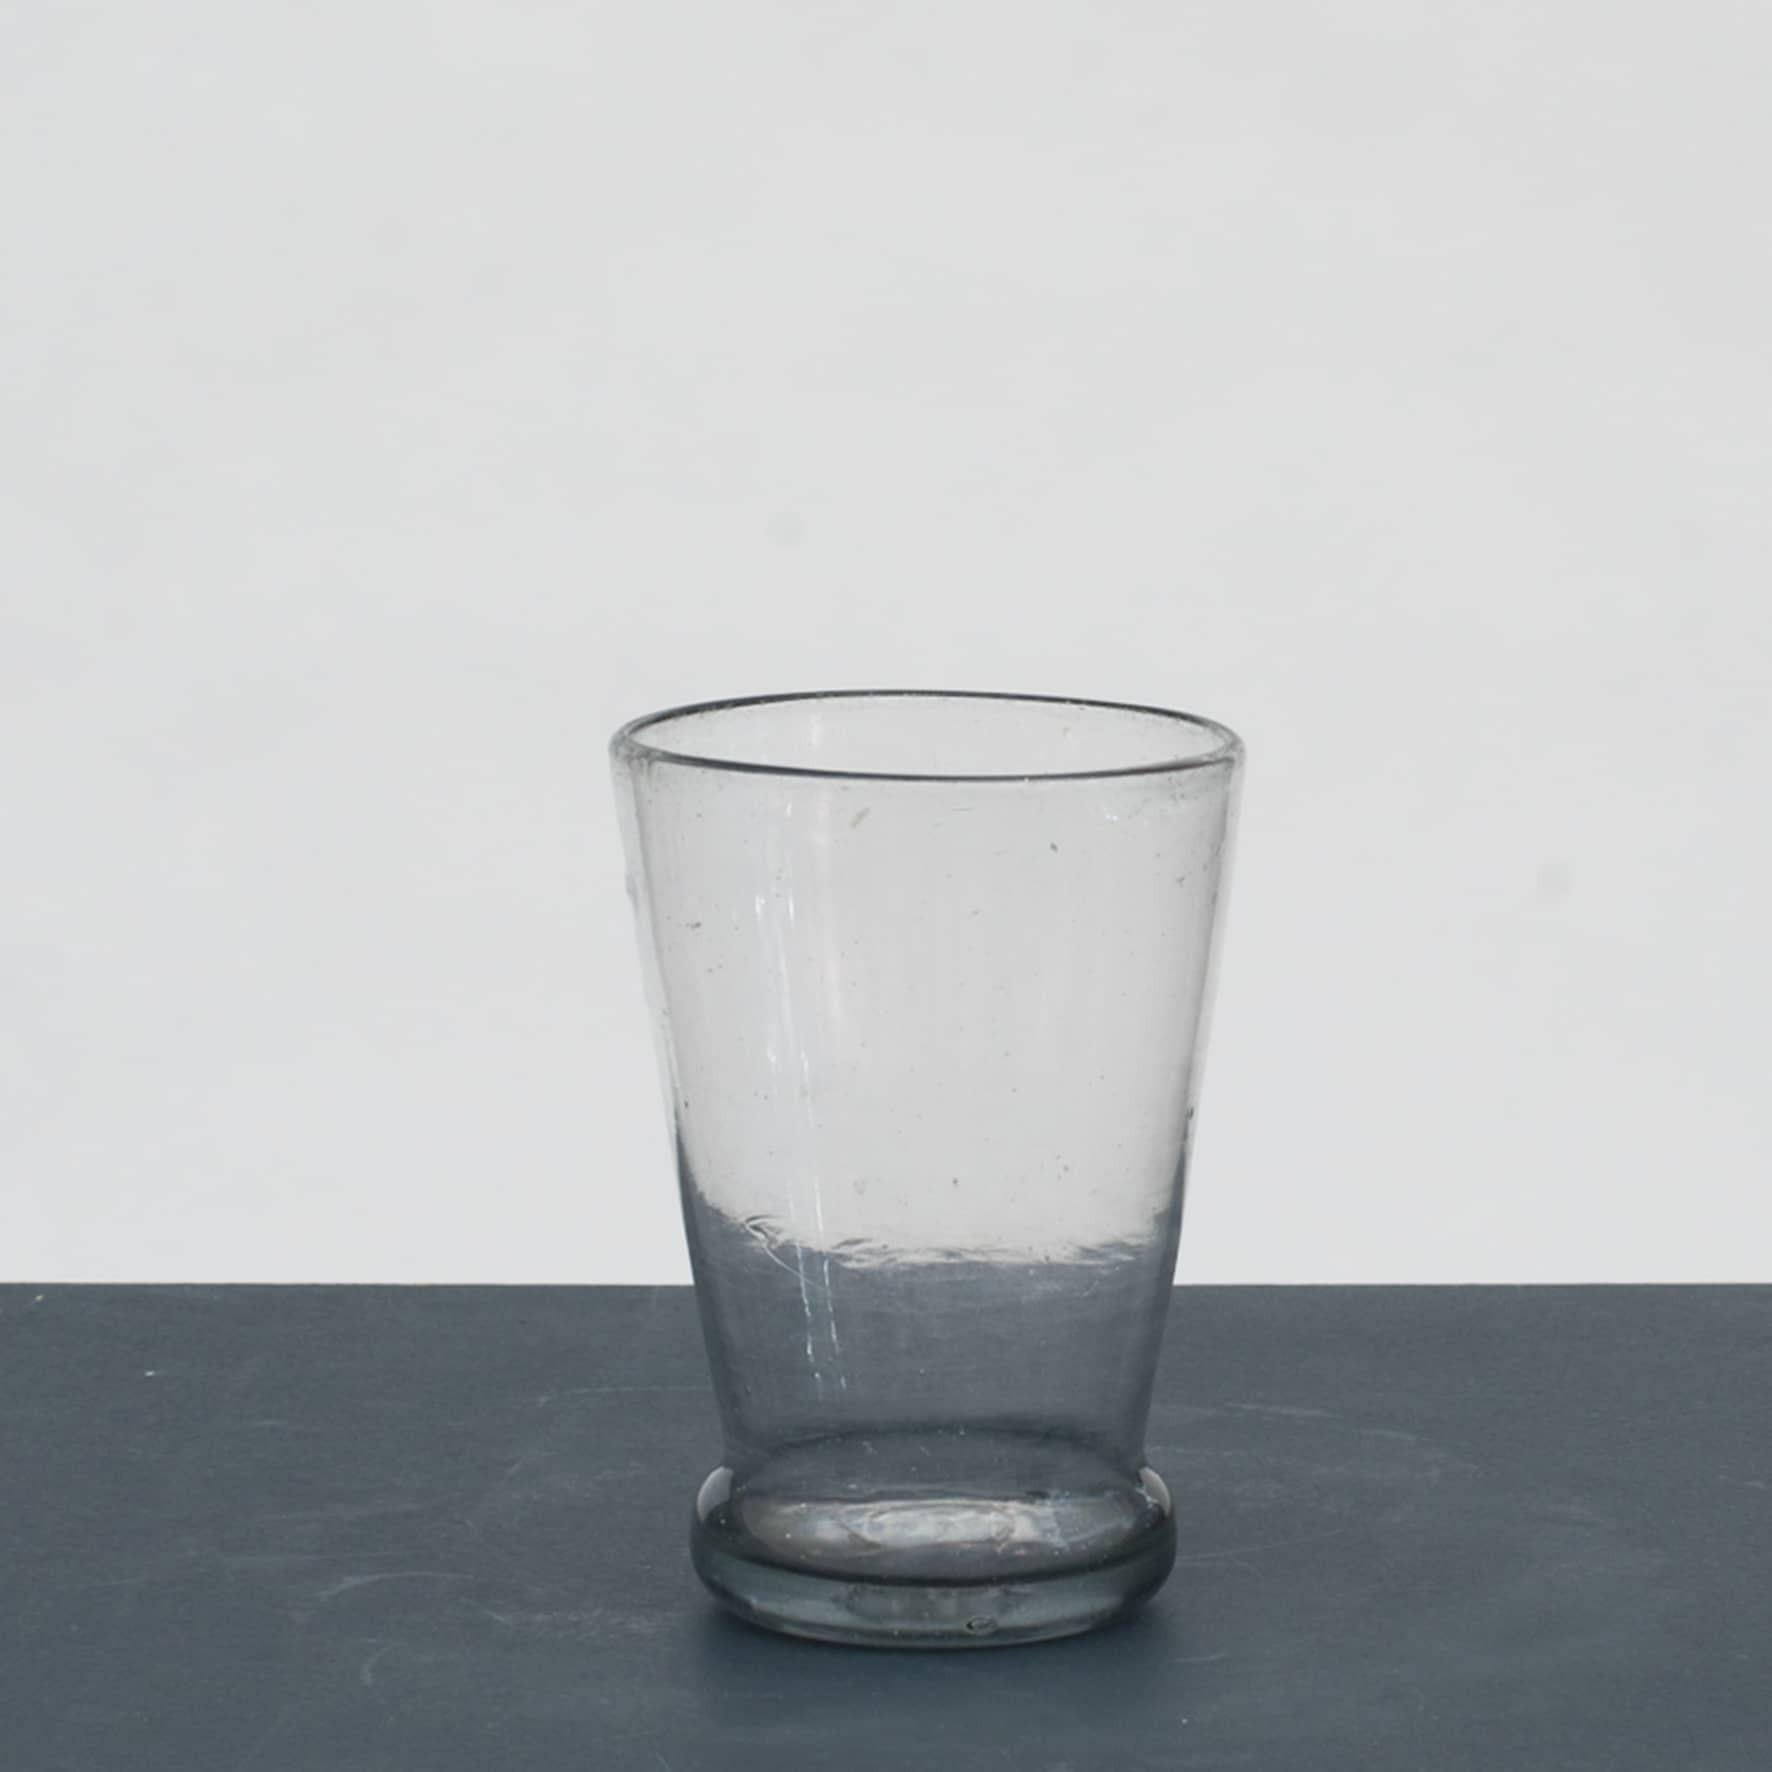 Nøstetangen Dommernix beaker with greyish tint, conical cup with bulge above the slightly arched base - a half-pot glass.
Dommernix is a Norwegian simplification of the German phrase ( tue mir nichts )

From the Norwegian glasswork Nøstetangen